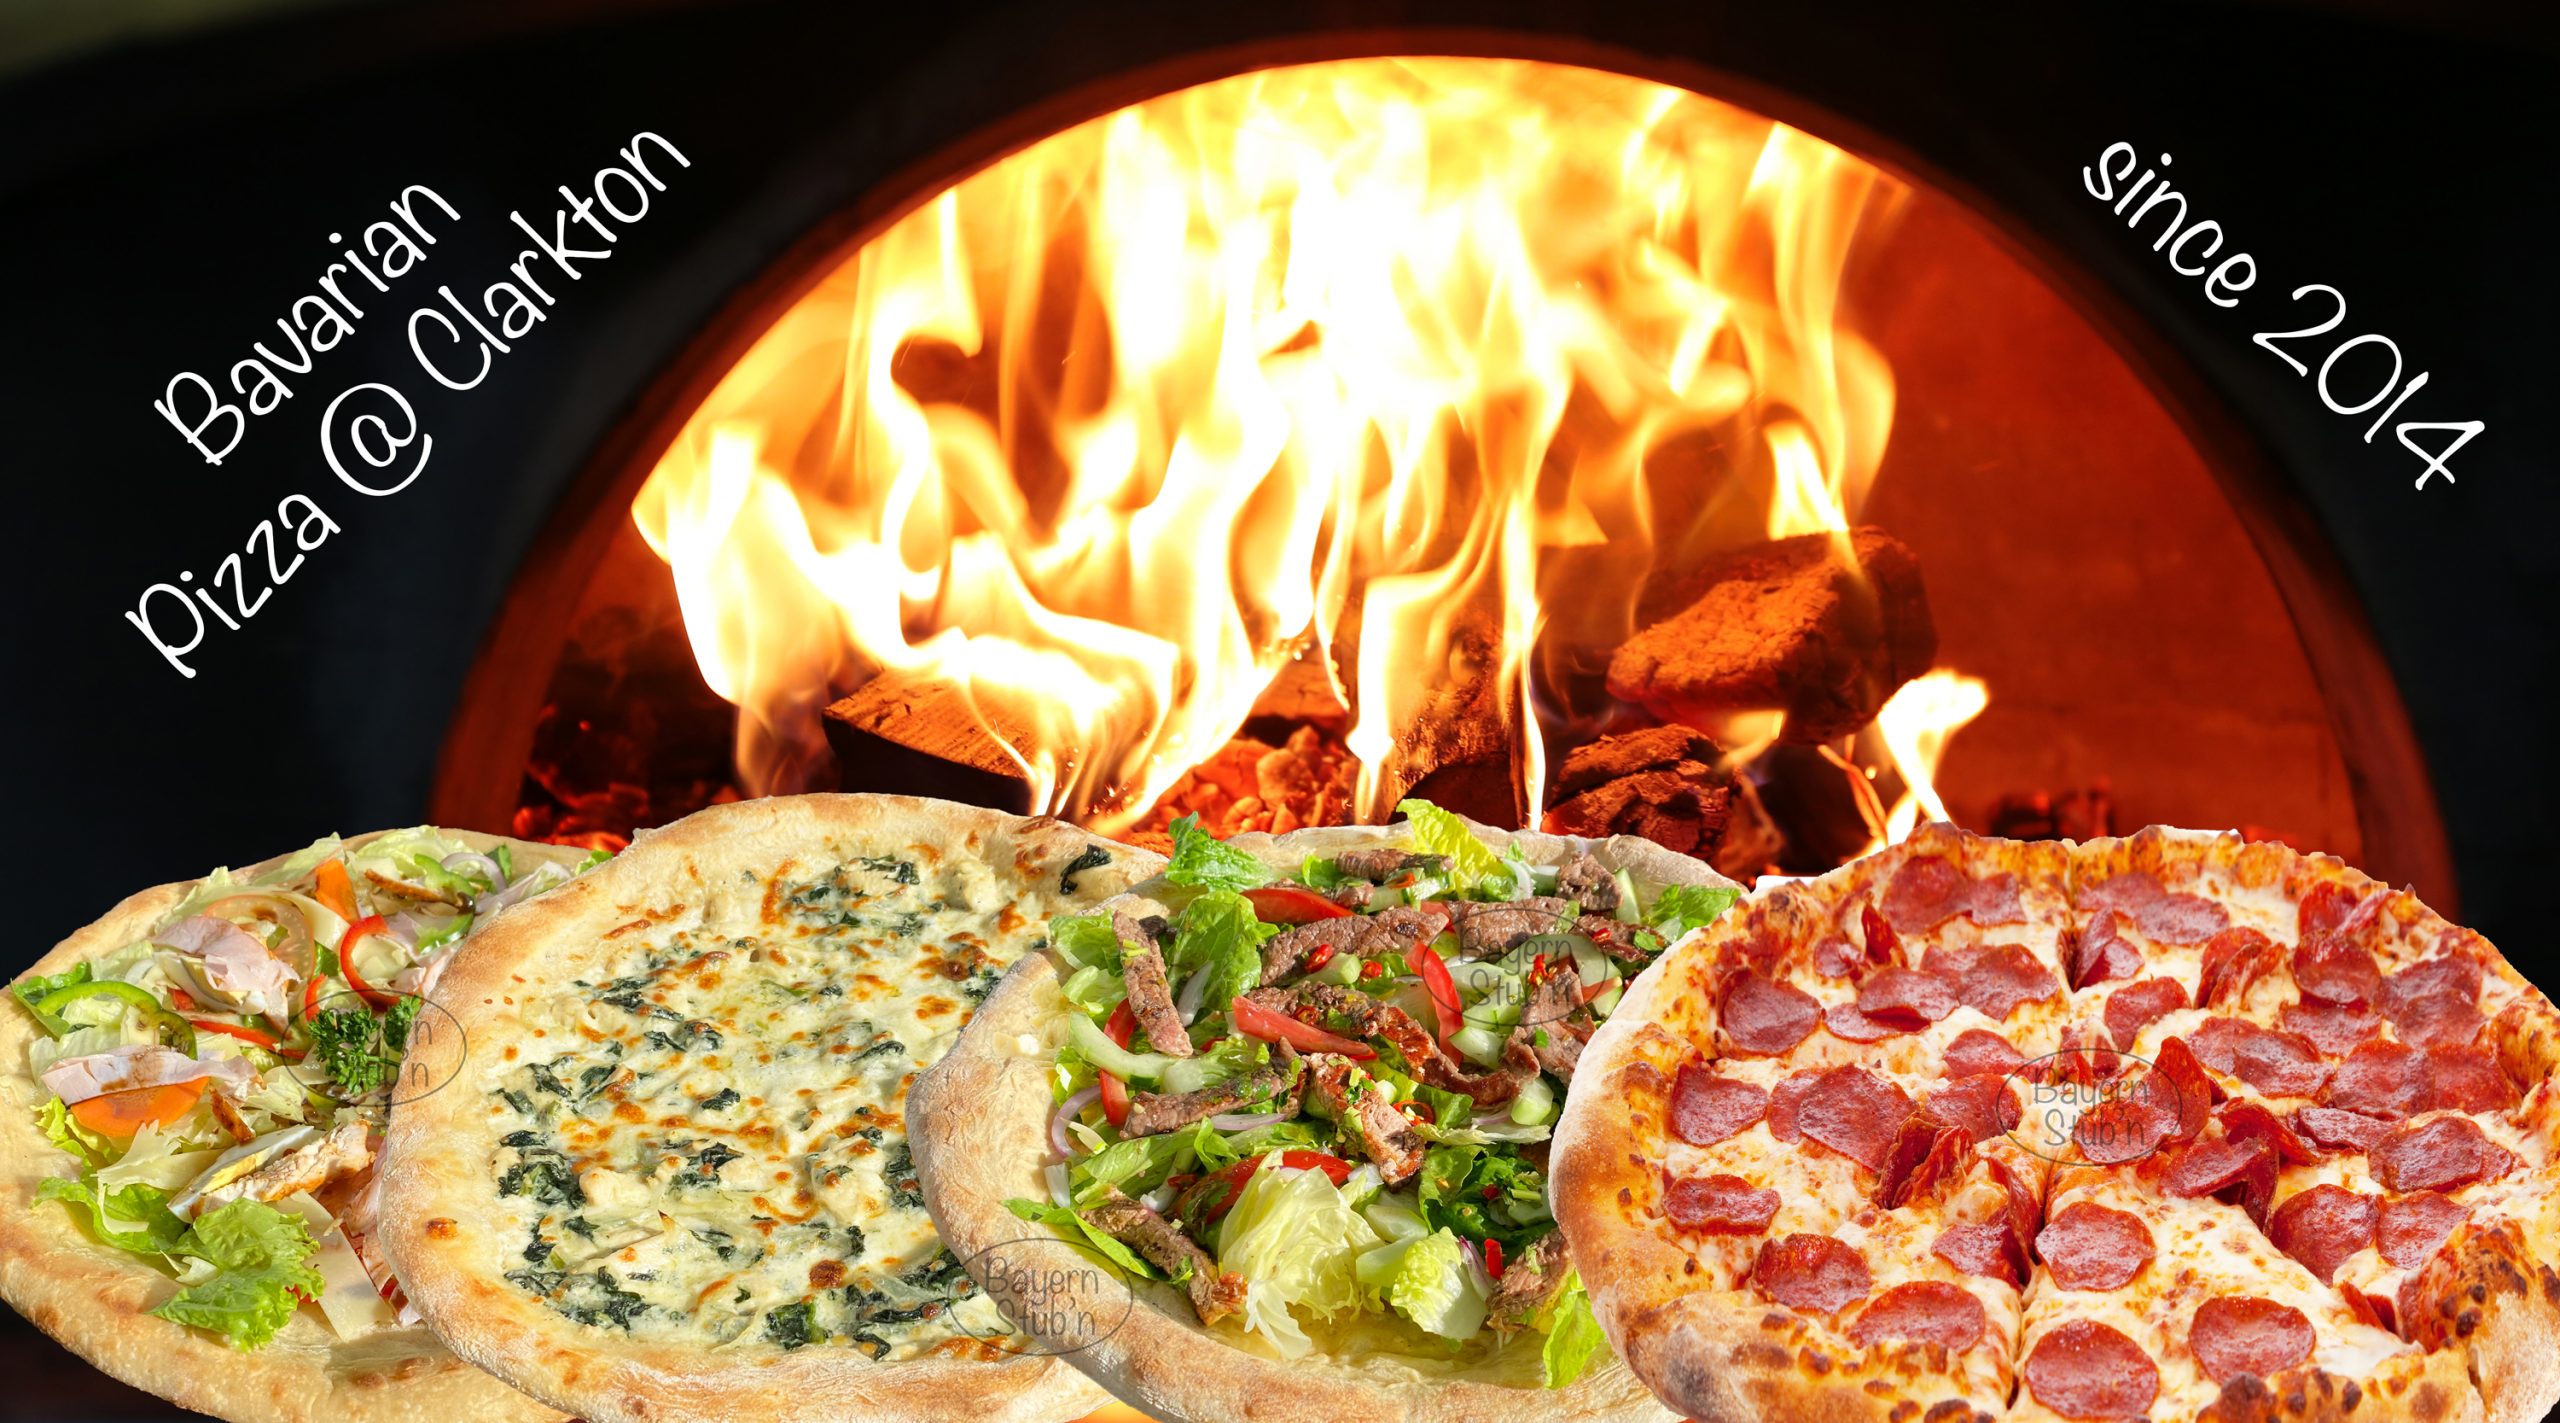 DISCOVER THE REAL FLAT PIZZA